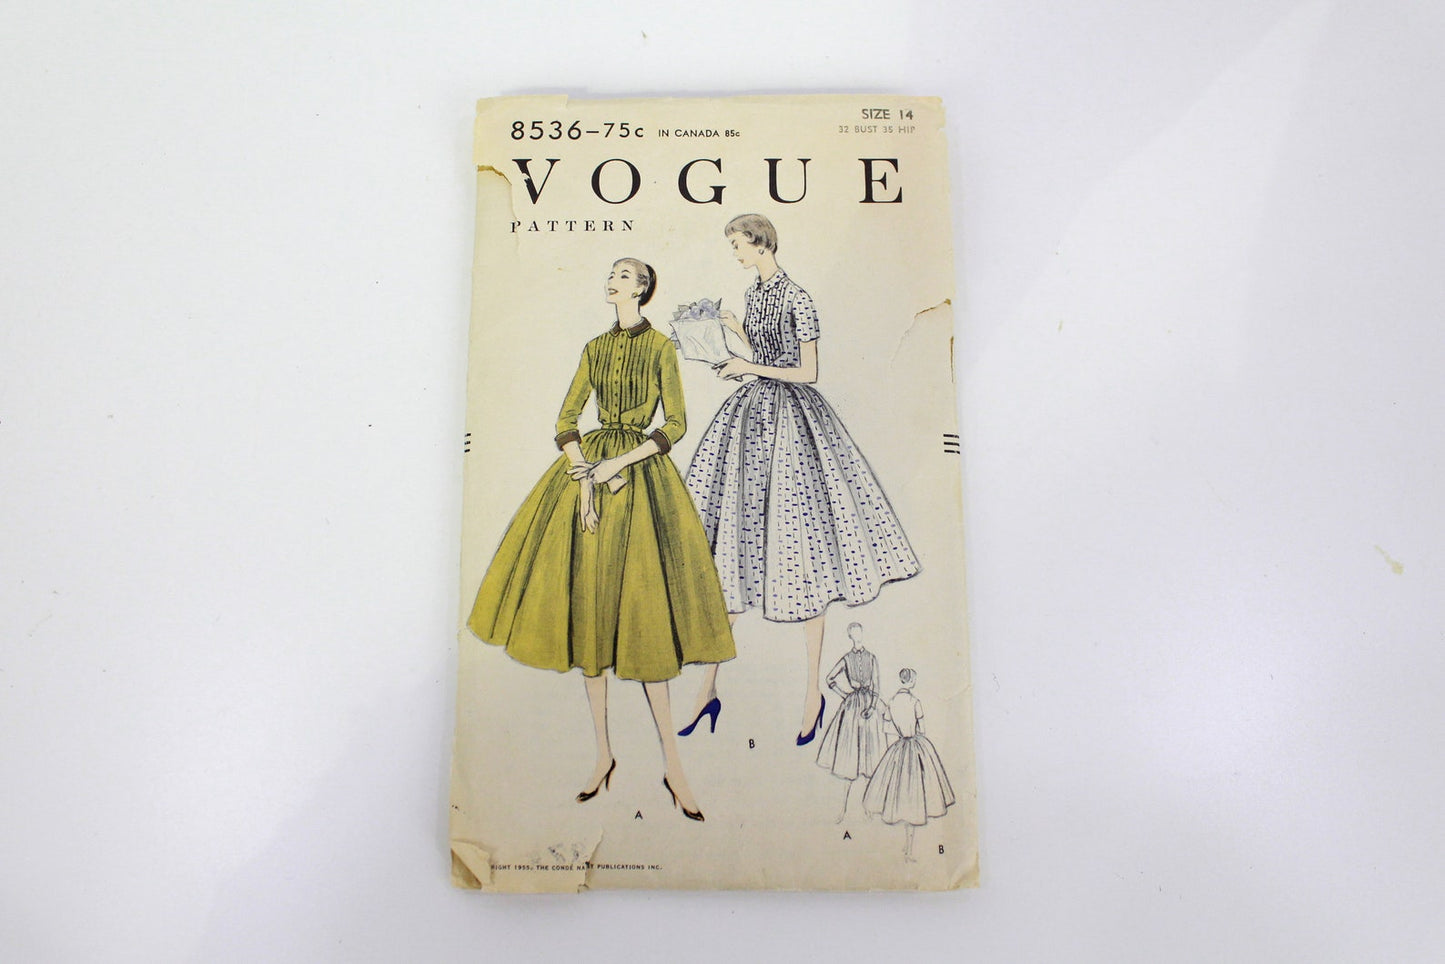 1950s Women's Dress Sewing Pattern Vogue 8536, Vintage 50s Dress Pattern, Short or Long Sleeves, Full Skirt, Bust 32 in., Complete